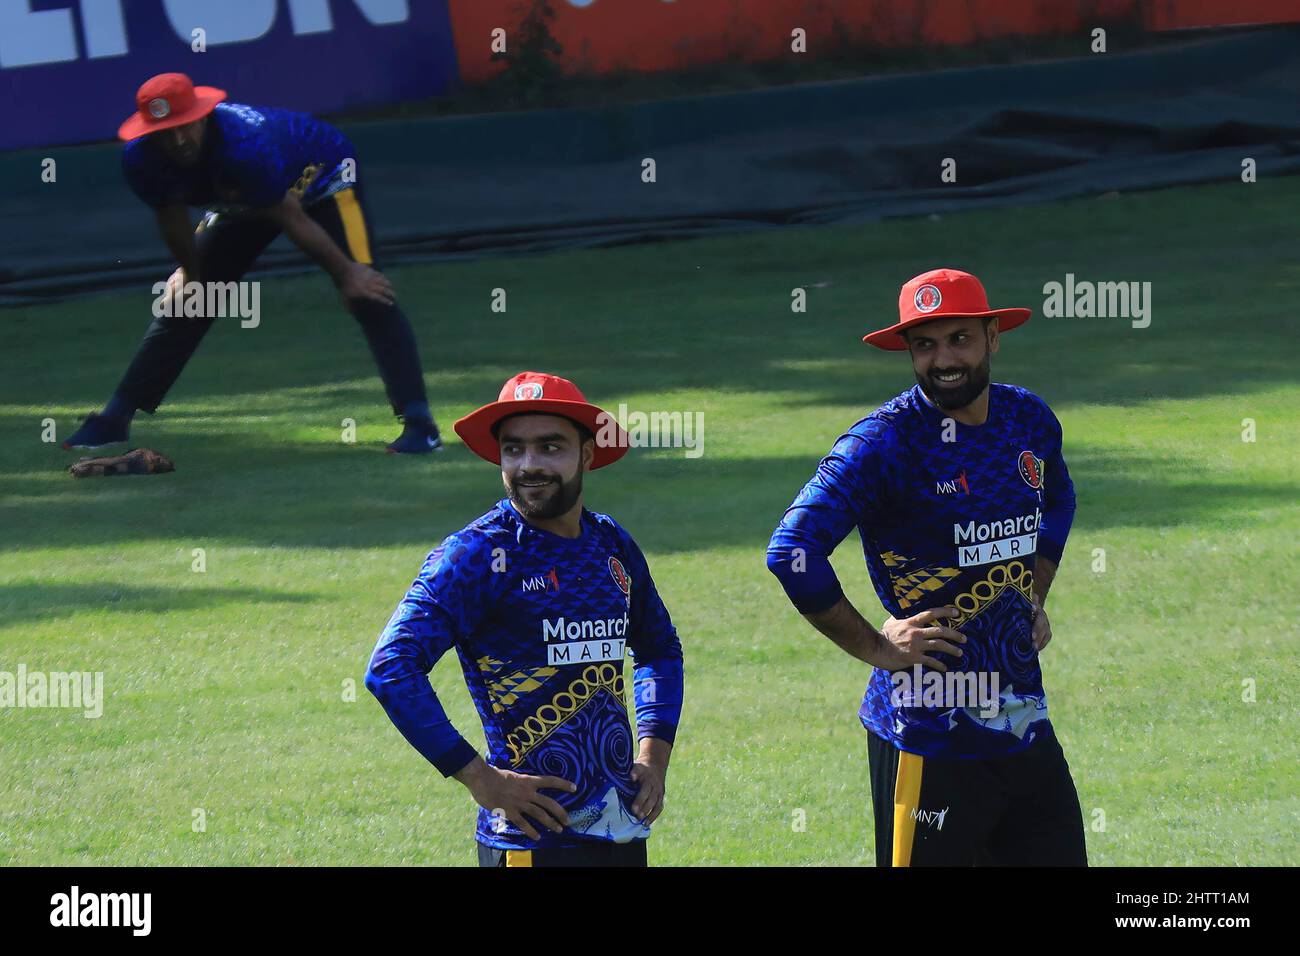 Afghanistan National Cricket Team Player Mohammad Nabi (R) and Rashid Khan (L)  seen during the practice session ahead of the T20 Series against Bangladesh at Sher-e-Bangla National Cricket Stadium. (Photo by Md Manik / SOPA Images/Sipa USA) Stock Photo